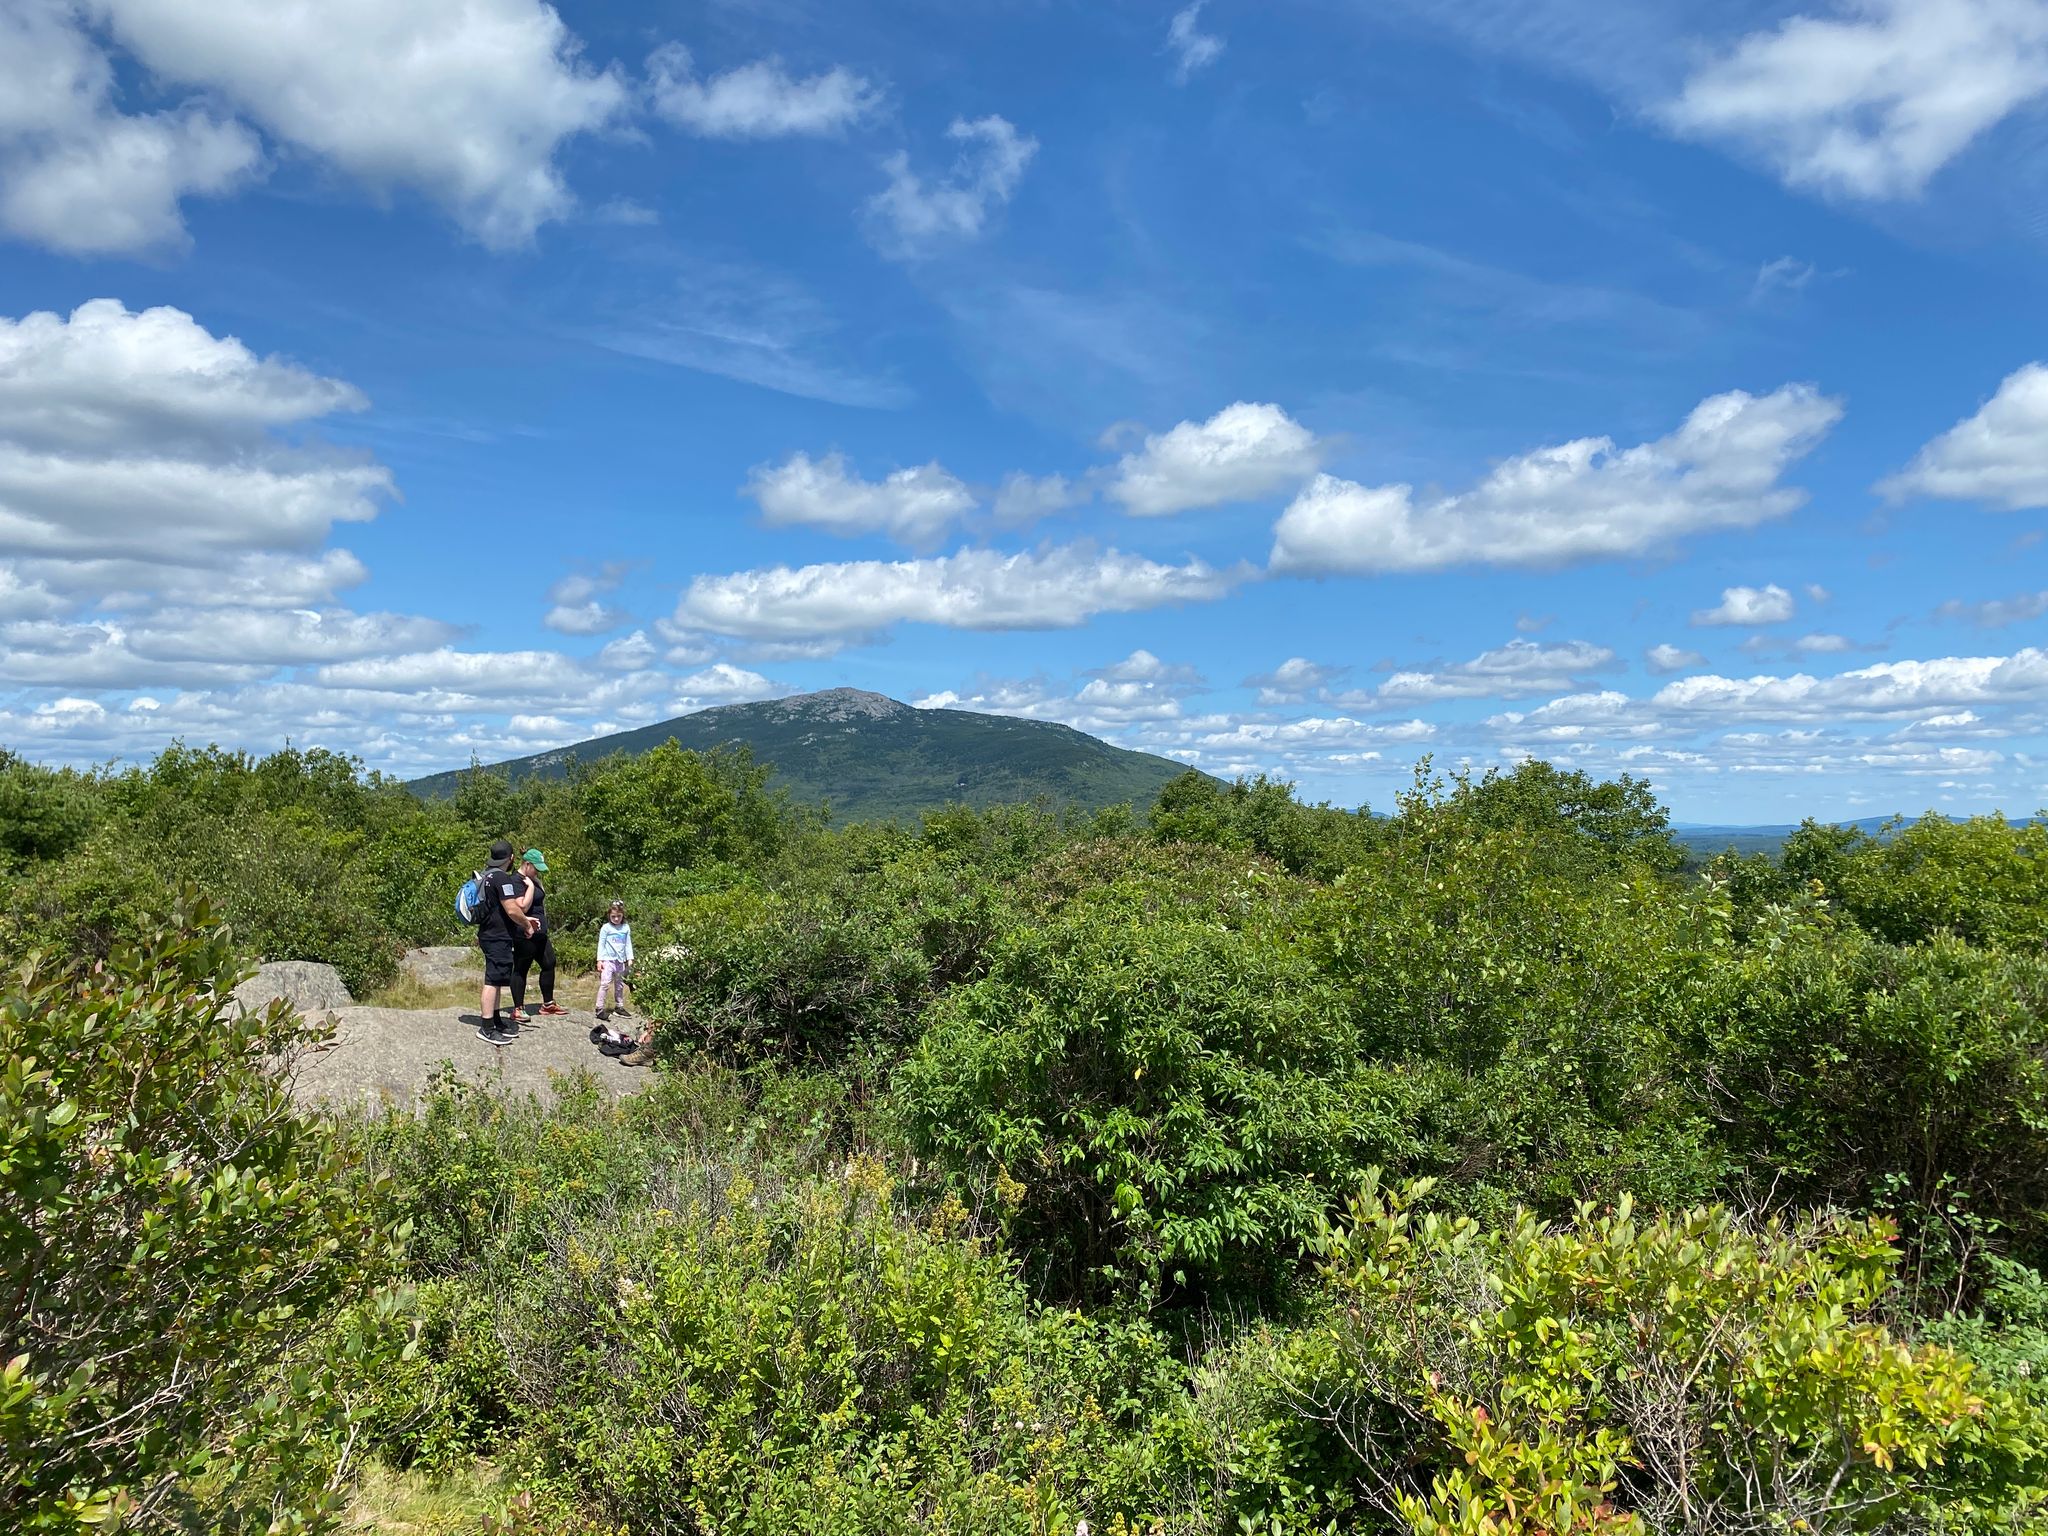 A view of Mount Monadnock in summer.